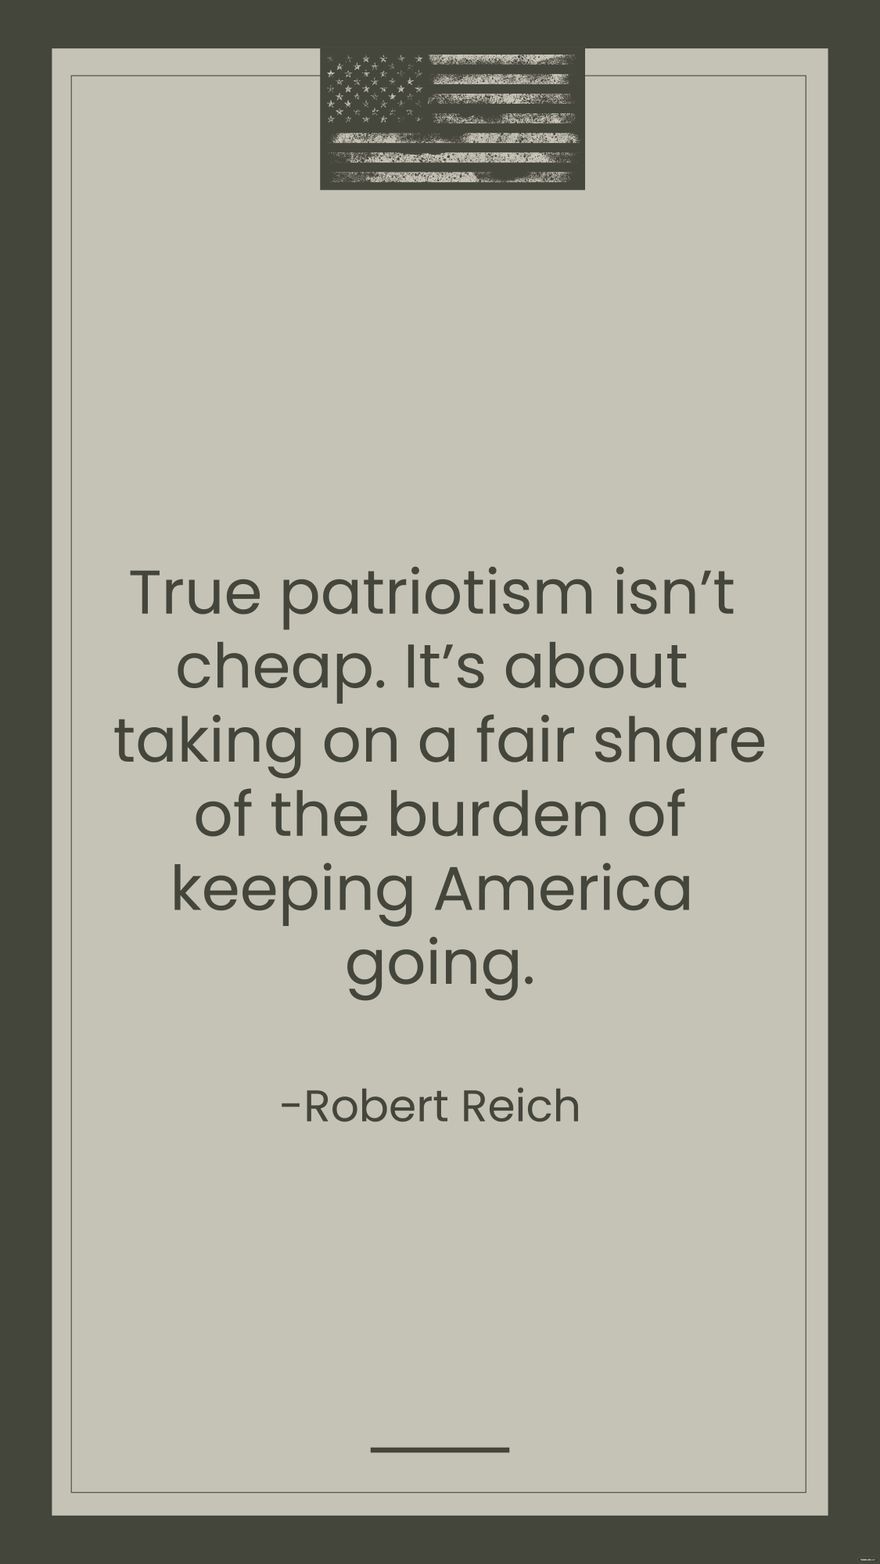 Free  Robert Reich - True patriotism isn't cheap. It's about taking on a fair share of the burden of keeping America going. in JPG